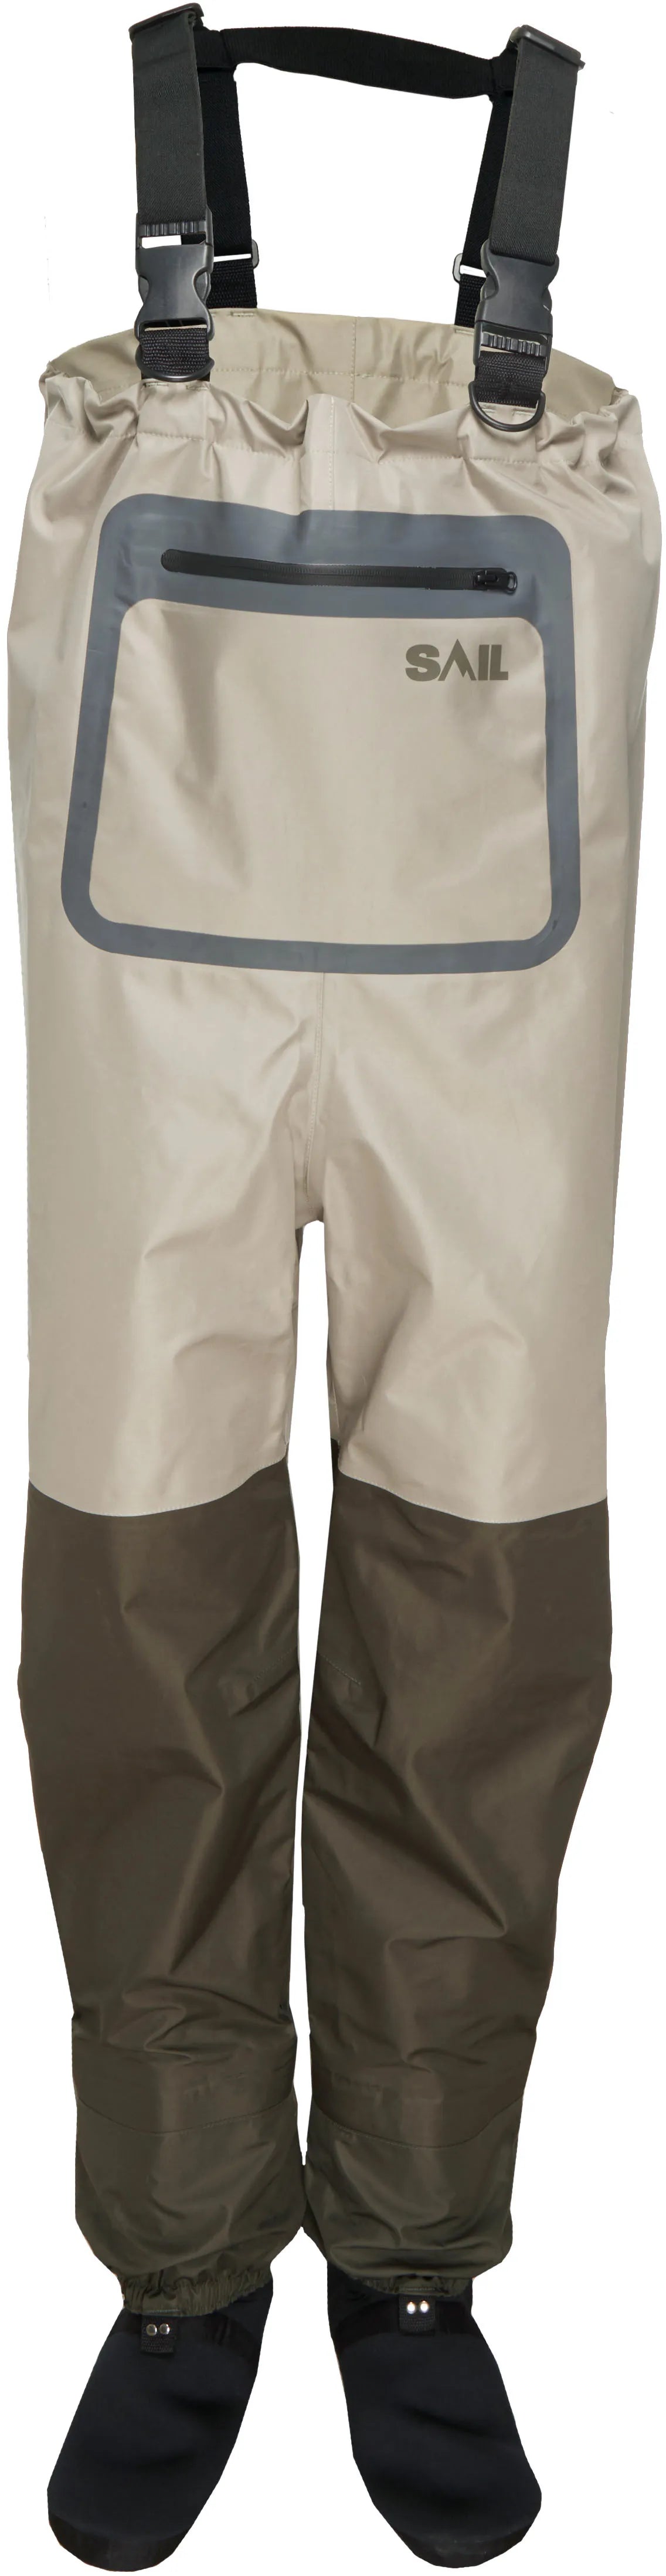 Day Tripper Fishing Waders